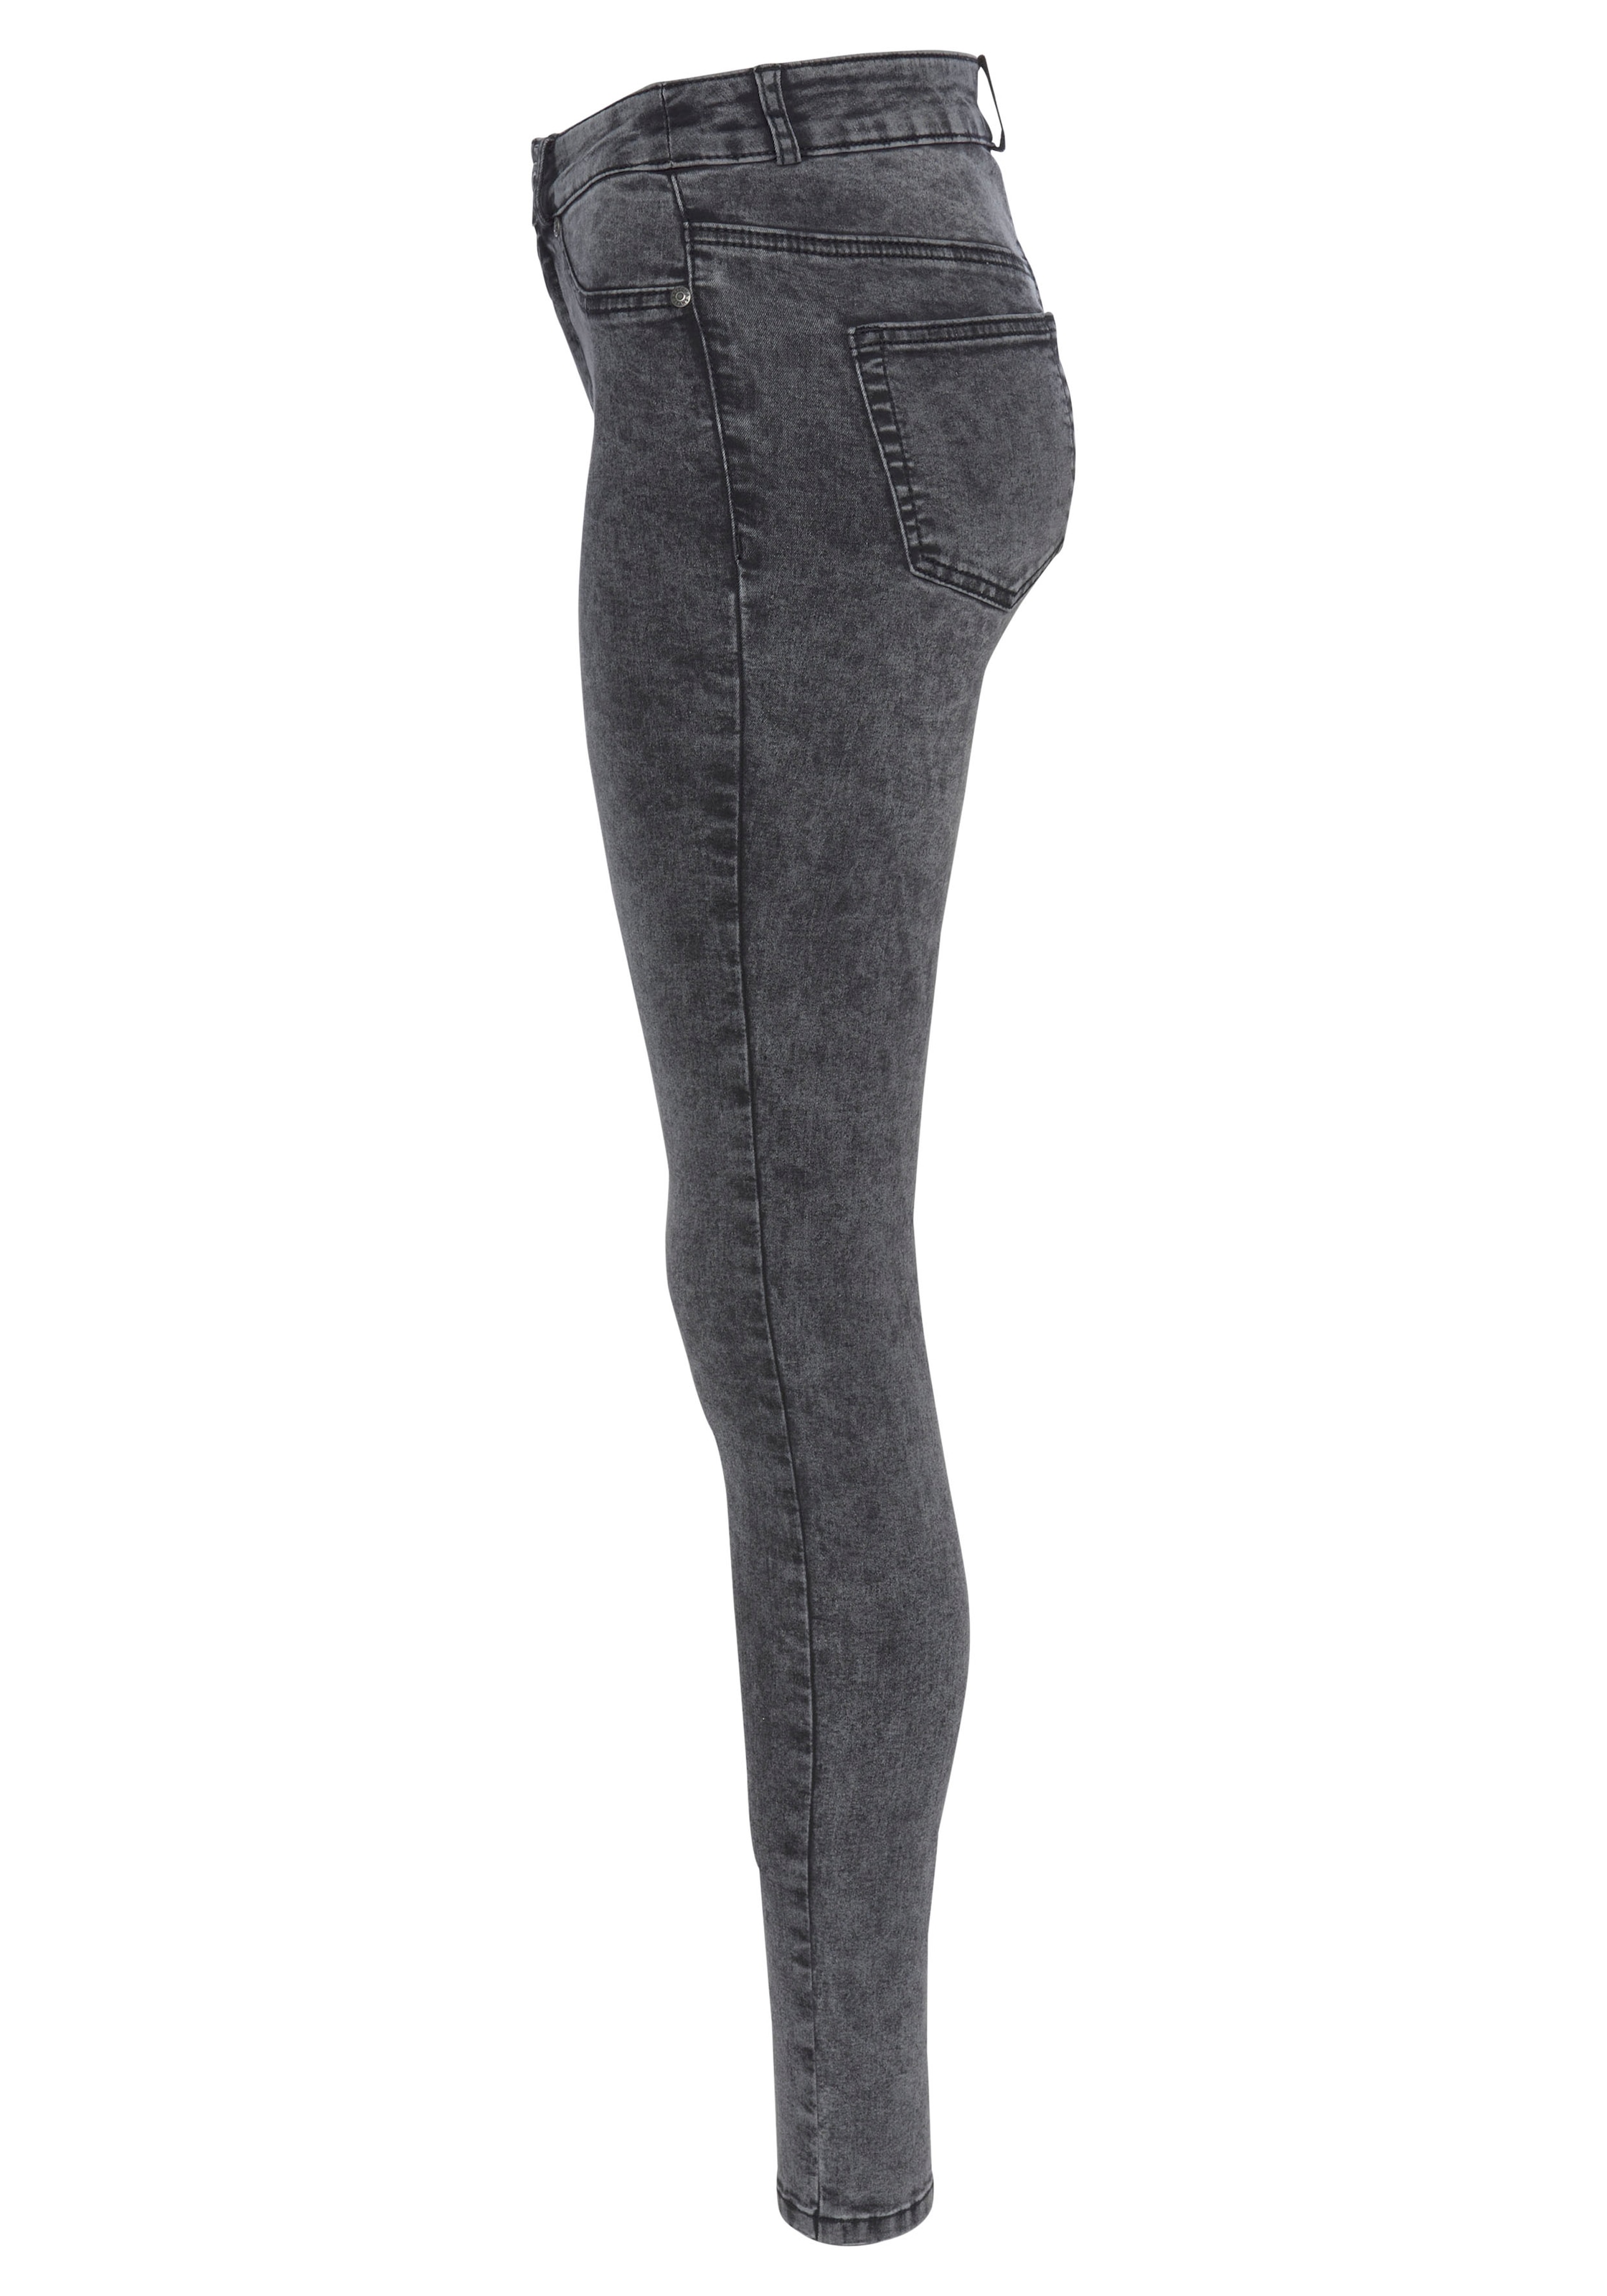 »Ultra moon Skinny-fit-Jeans washed«, Shop im Moonwashed Online Jeans Arizona OTTO Stretch